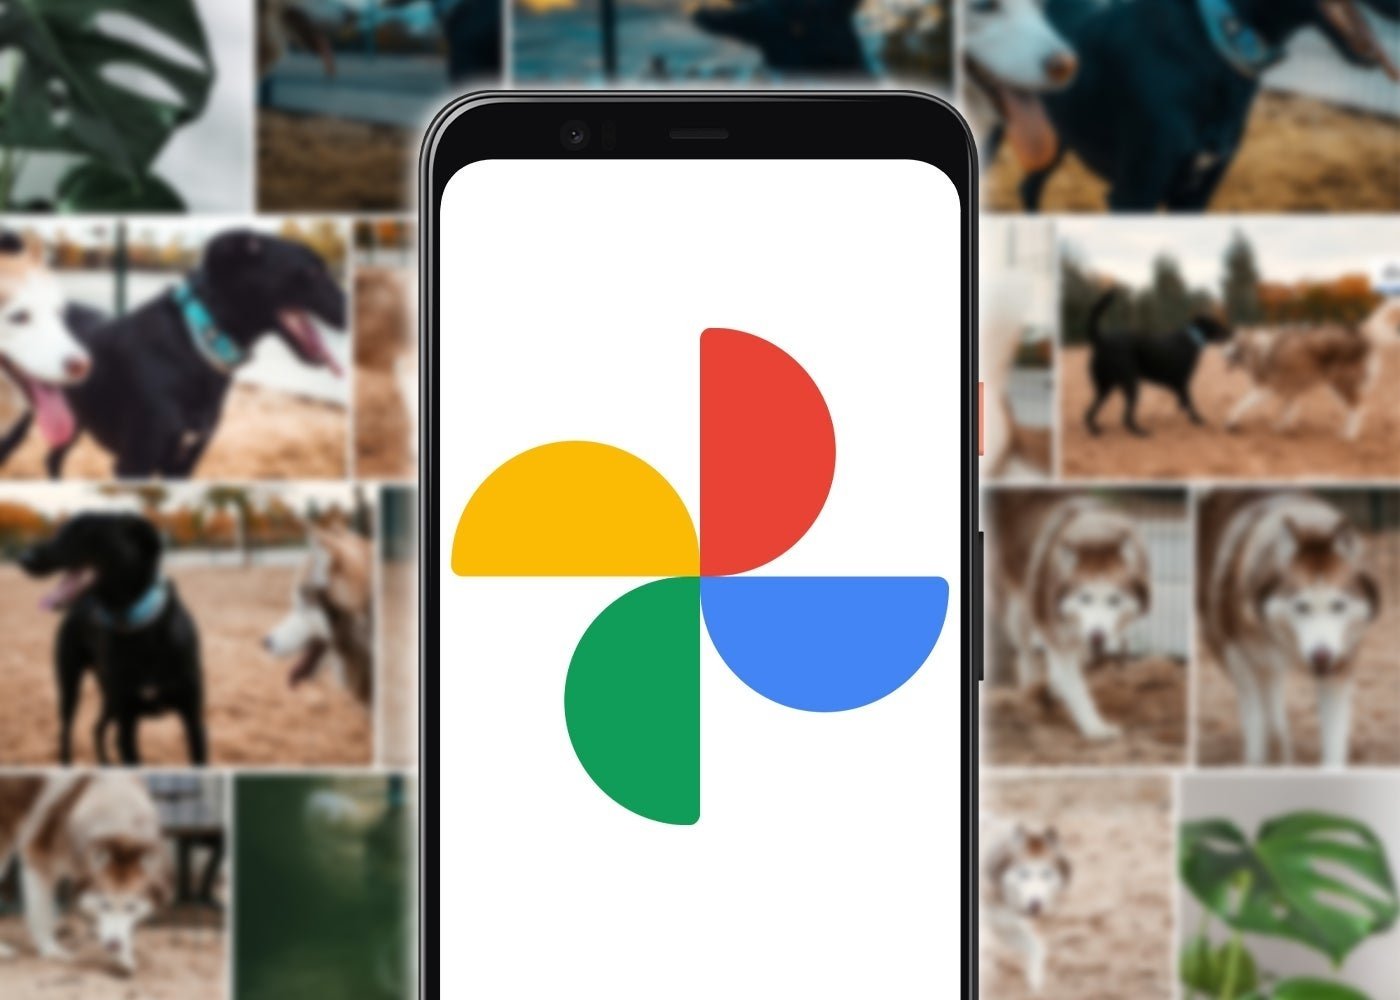 Download images and videos from Google Photos